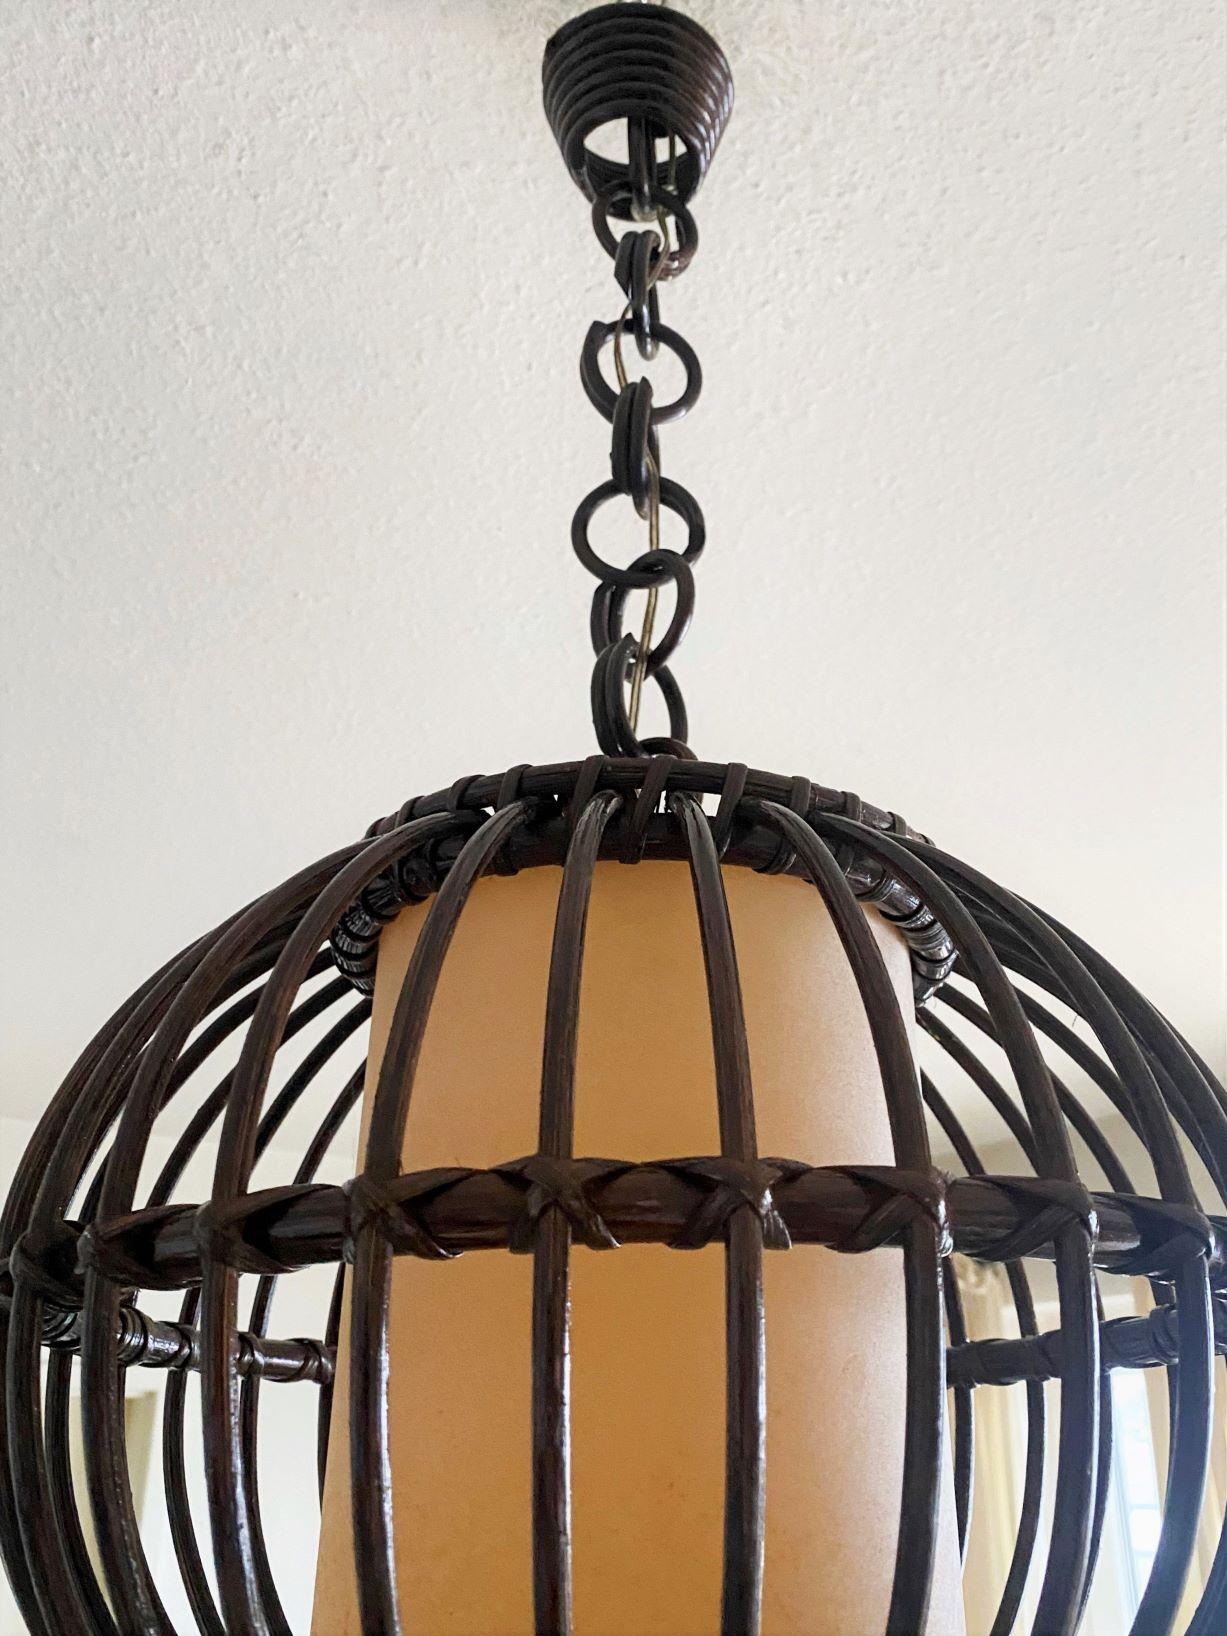 20th Century Louis Sognot Bamboo Rattan Pendant Lantern with Perchment Shade, France, 1950s For Sale